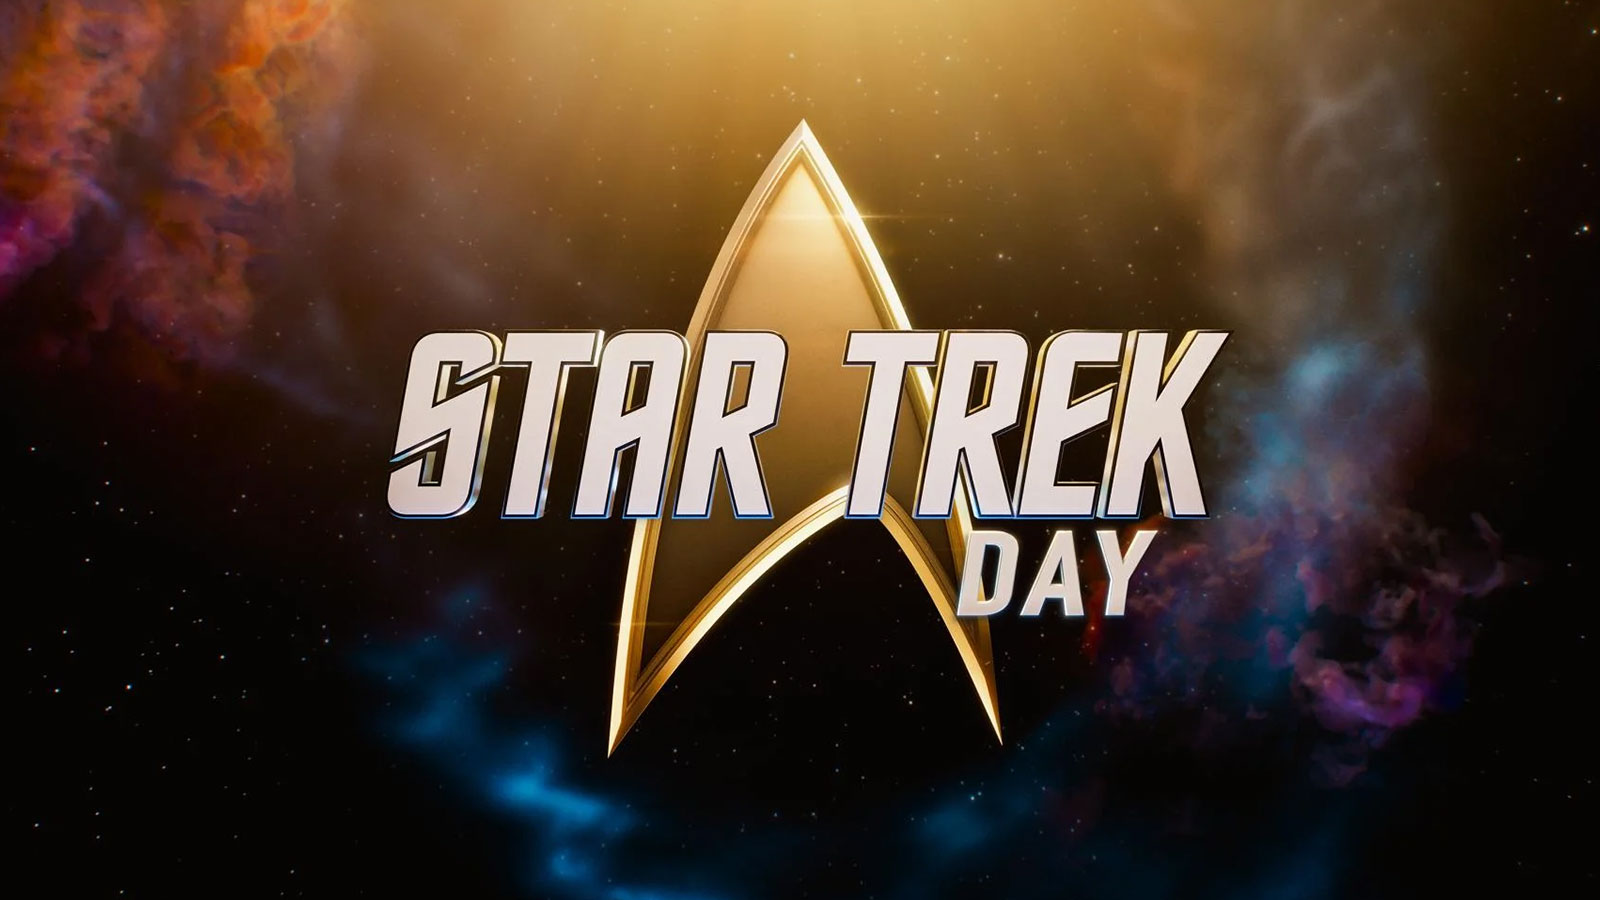 Star Trek Day returns September 8 with a live-streamed event, featuring Strange New Worlds, Picard, Discovery, Lower Decks & Prodigy